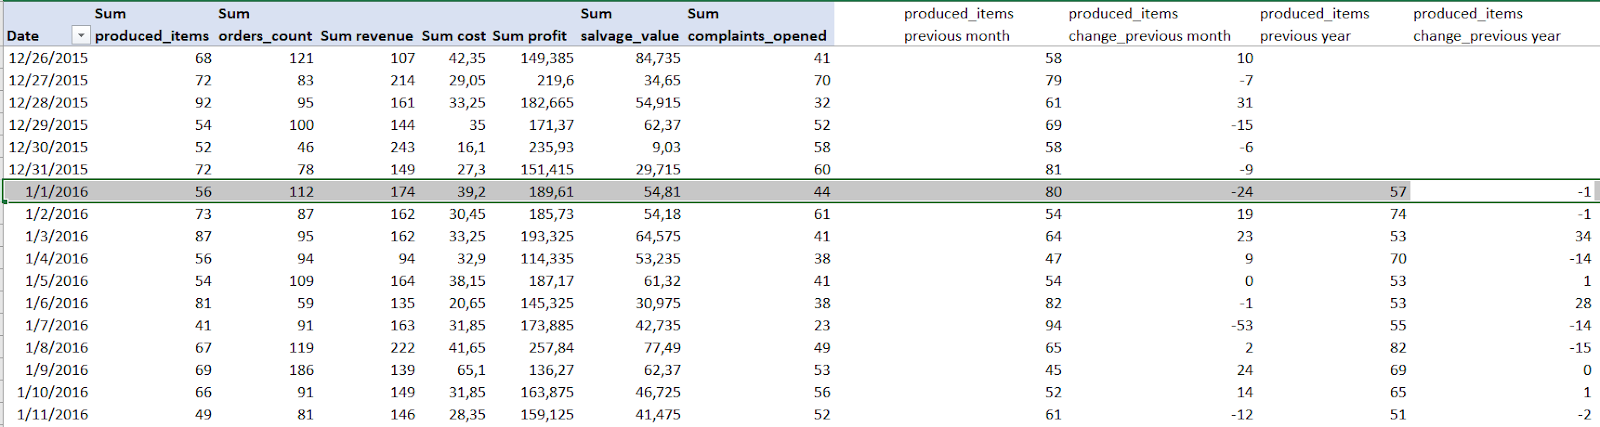 Grouping data in SCM spreadsheet example